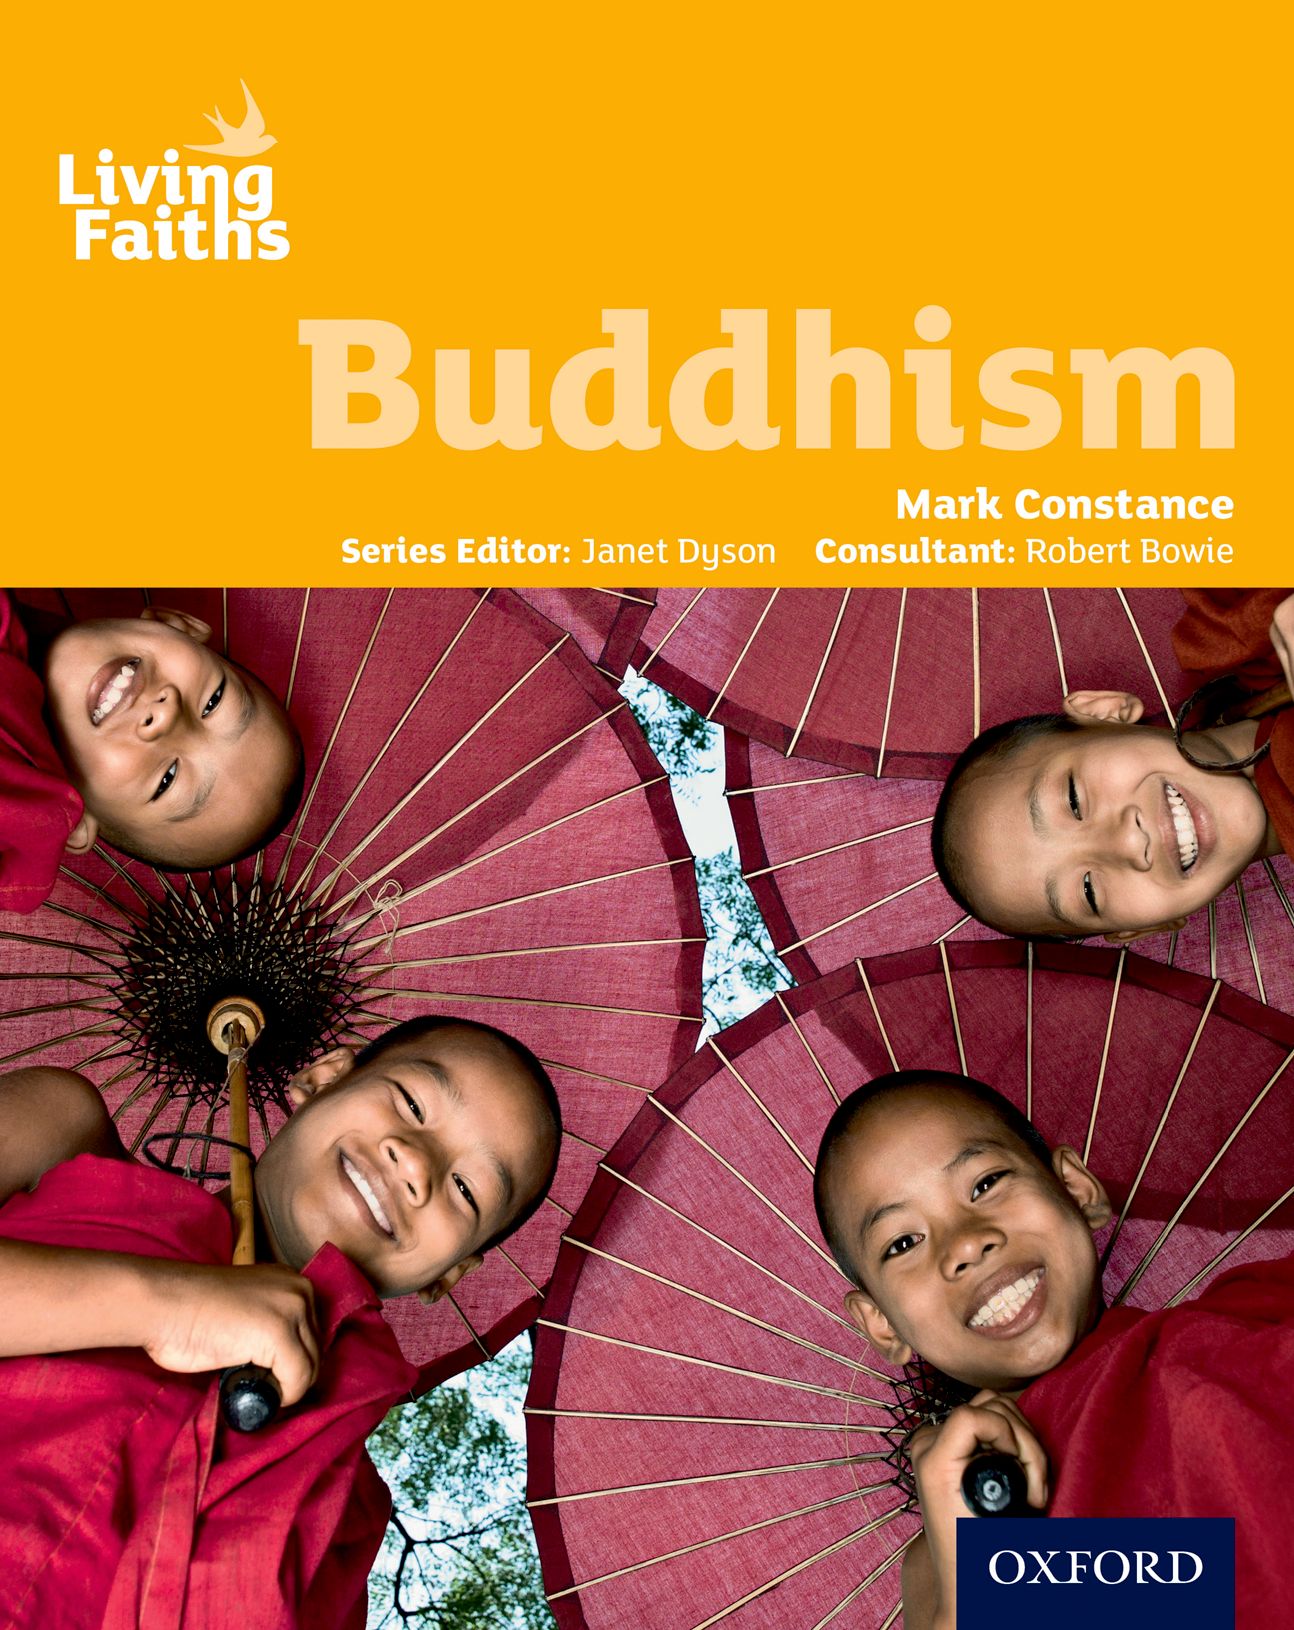 Featured image for “Living Faiths Buddhism Student Book”